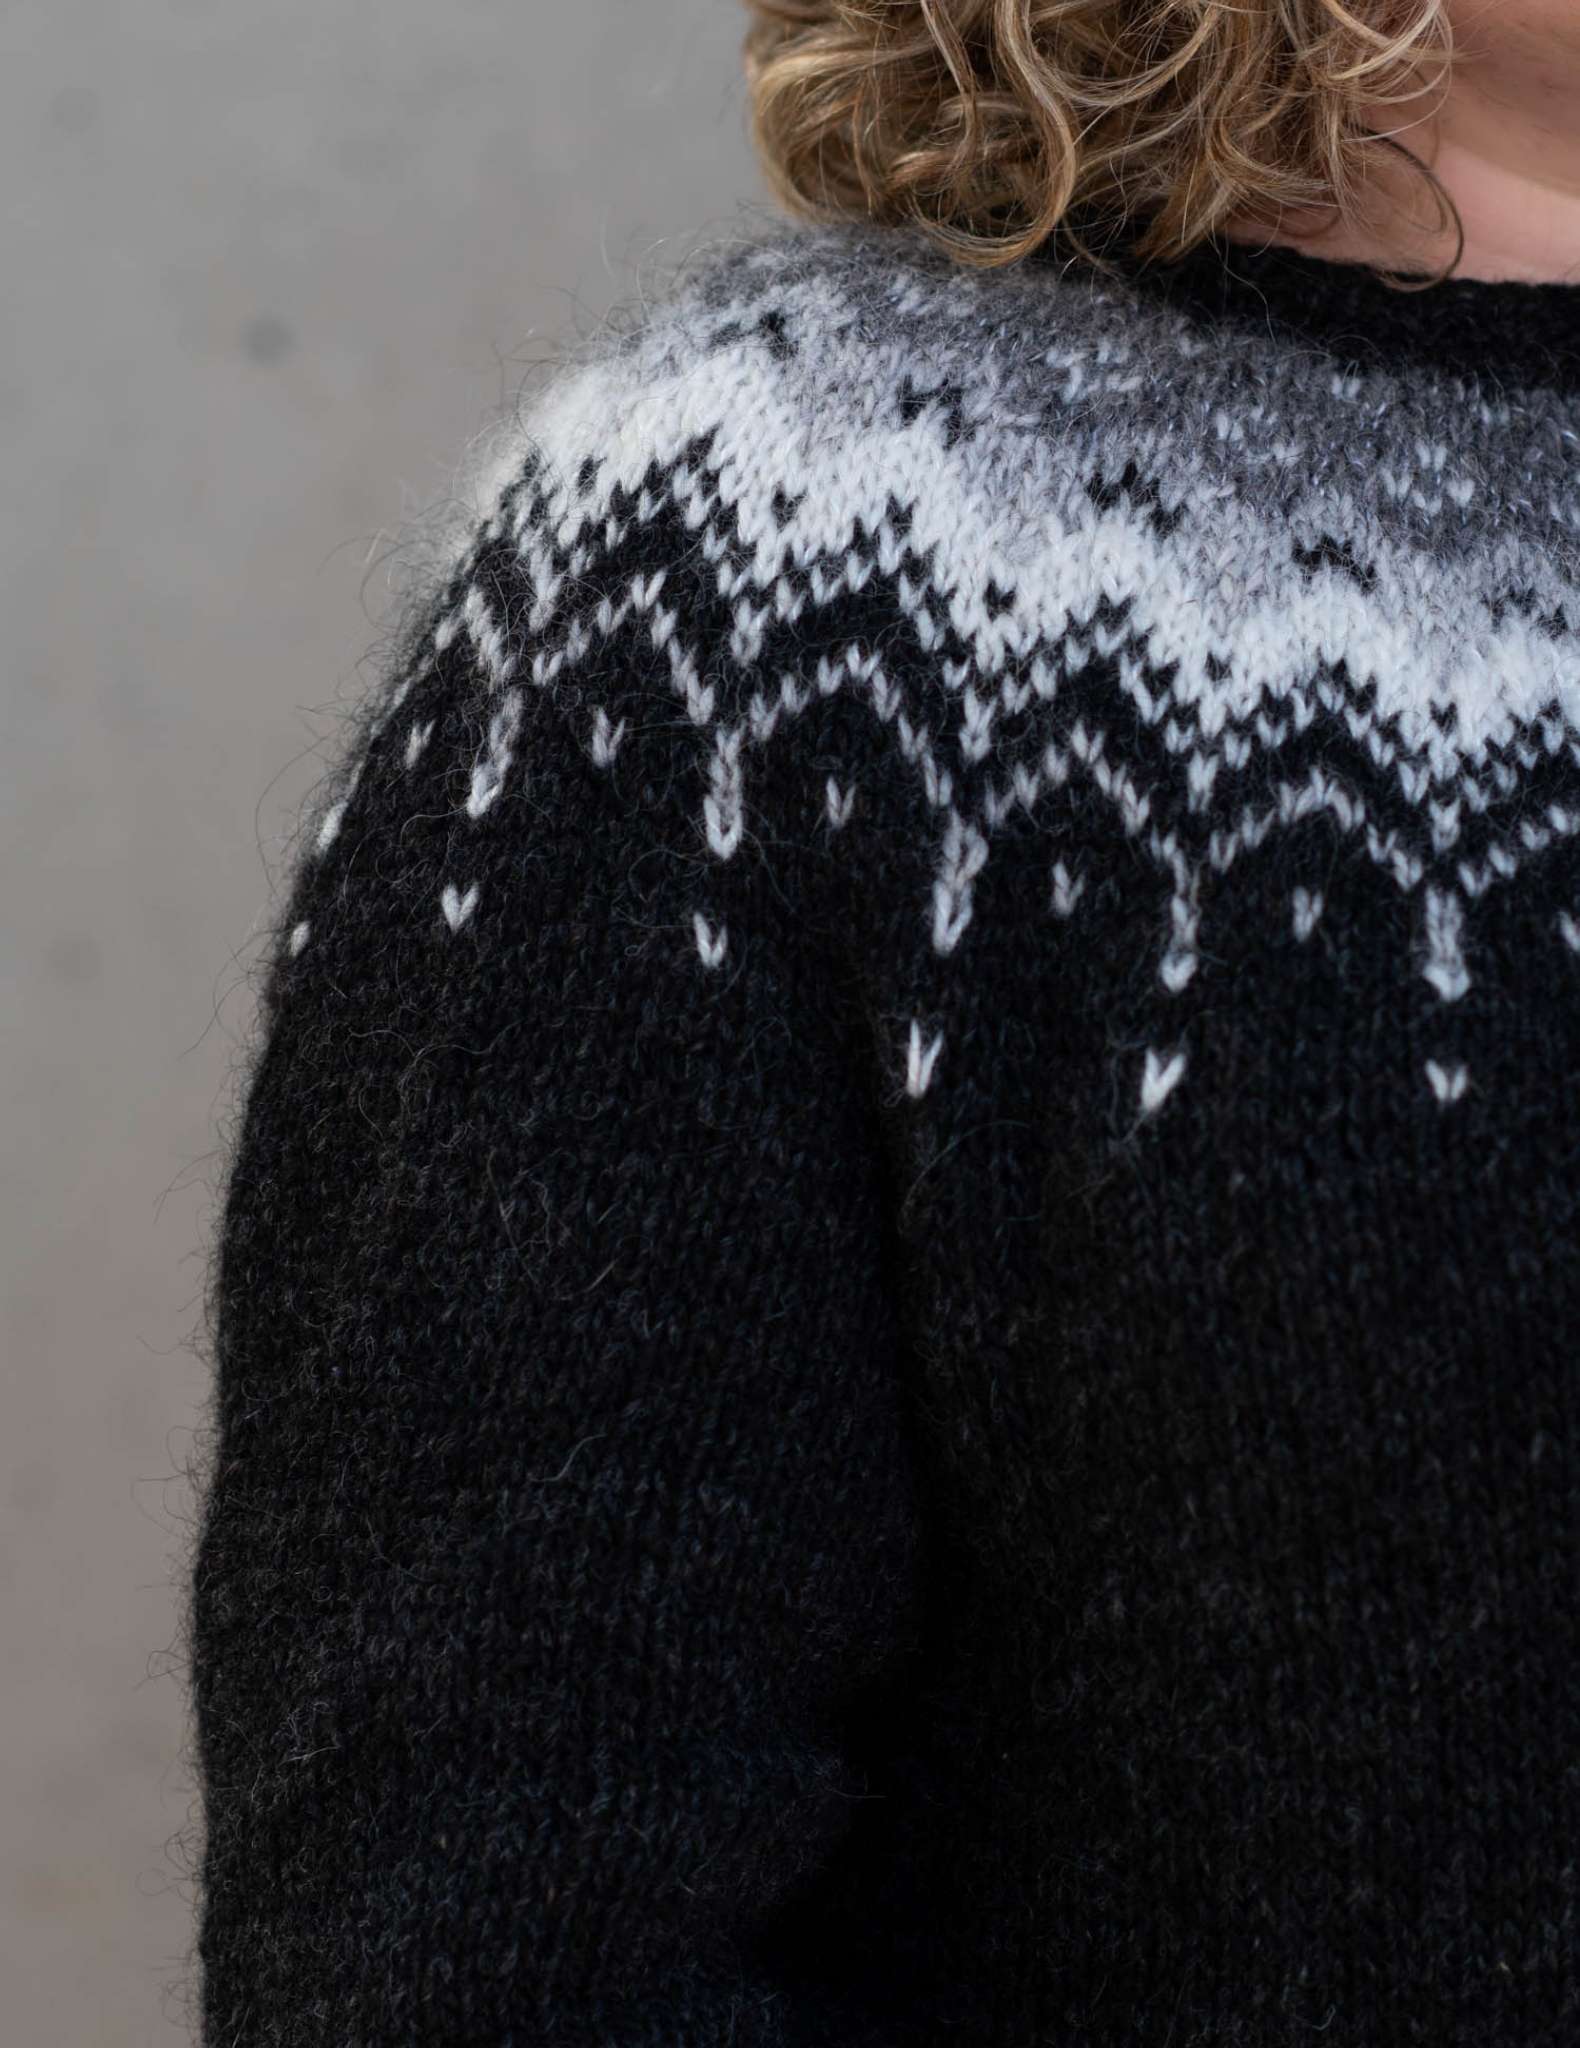 A close of the shoulder of a model with curly hair wearing a colourwork sweater in black with a contrast yoke in greys and white.